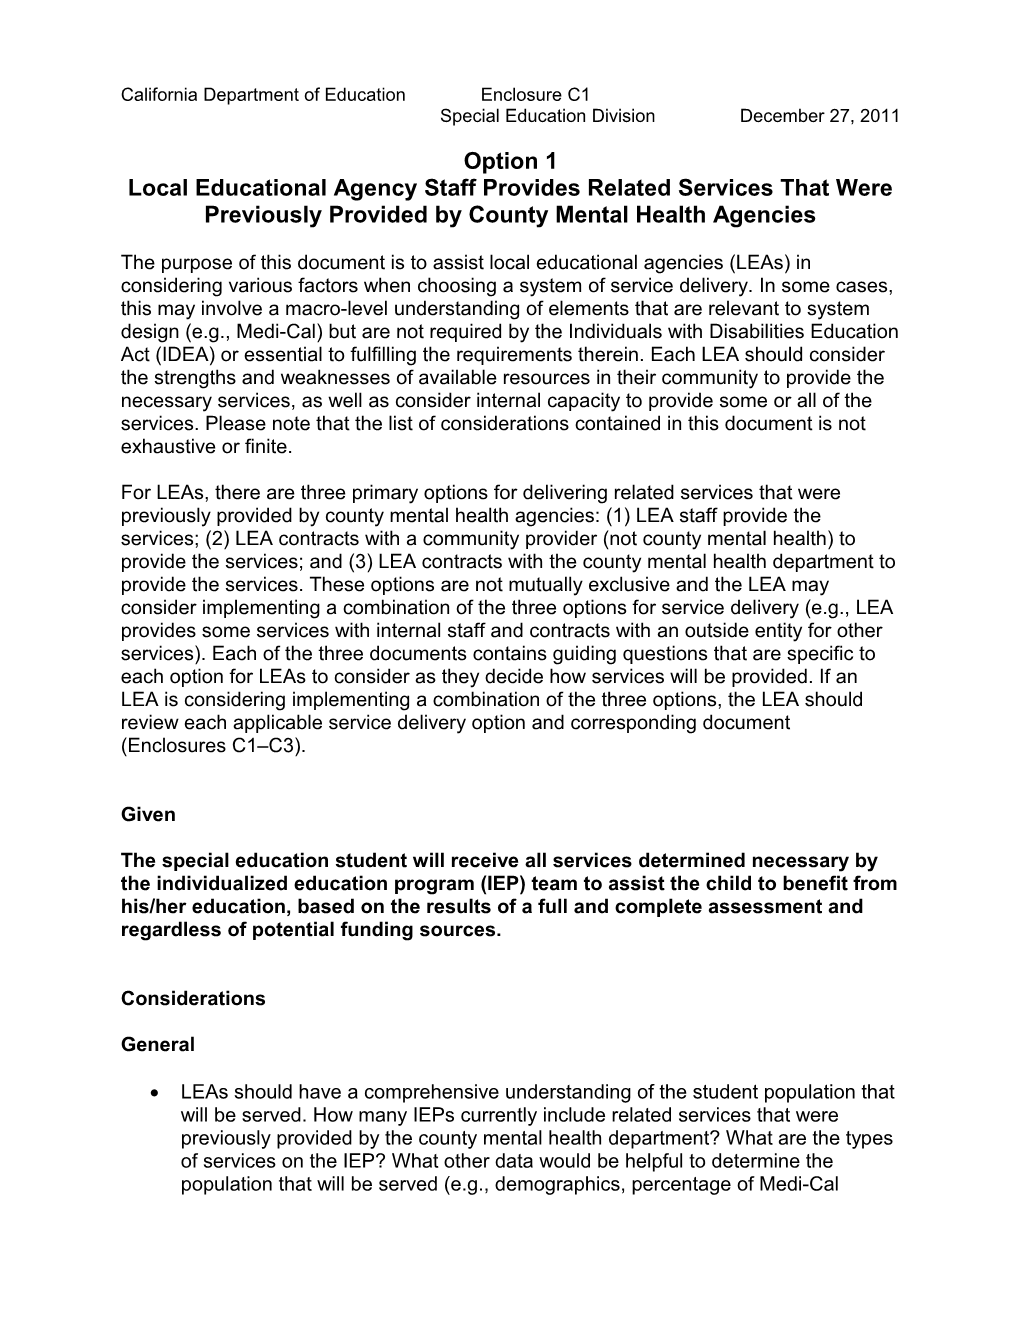 Option One - Announcements & Current Issues (CA Dept of Education)